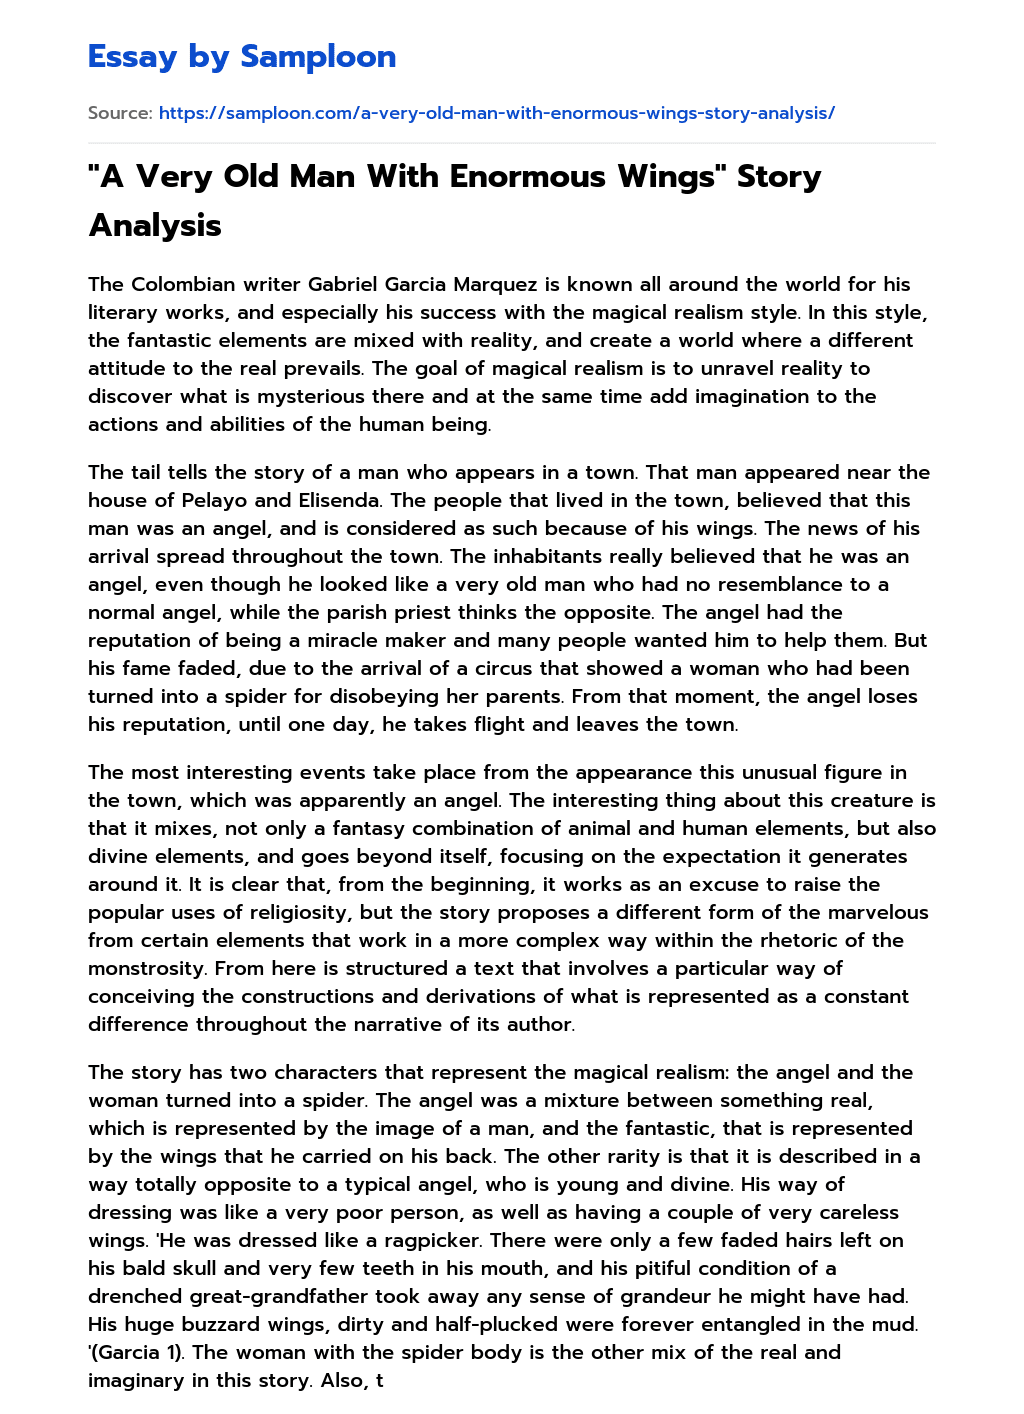 “A Very Old Man With Enormous Wings” Story Analysis essay